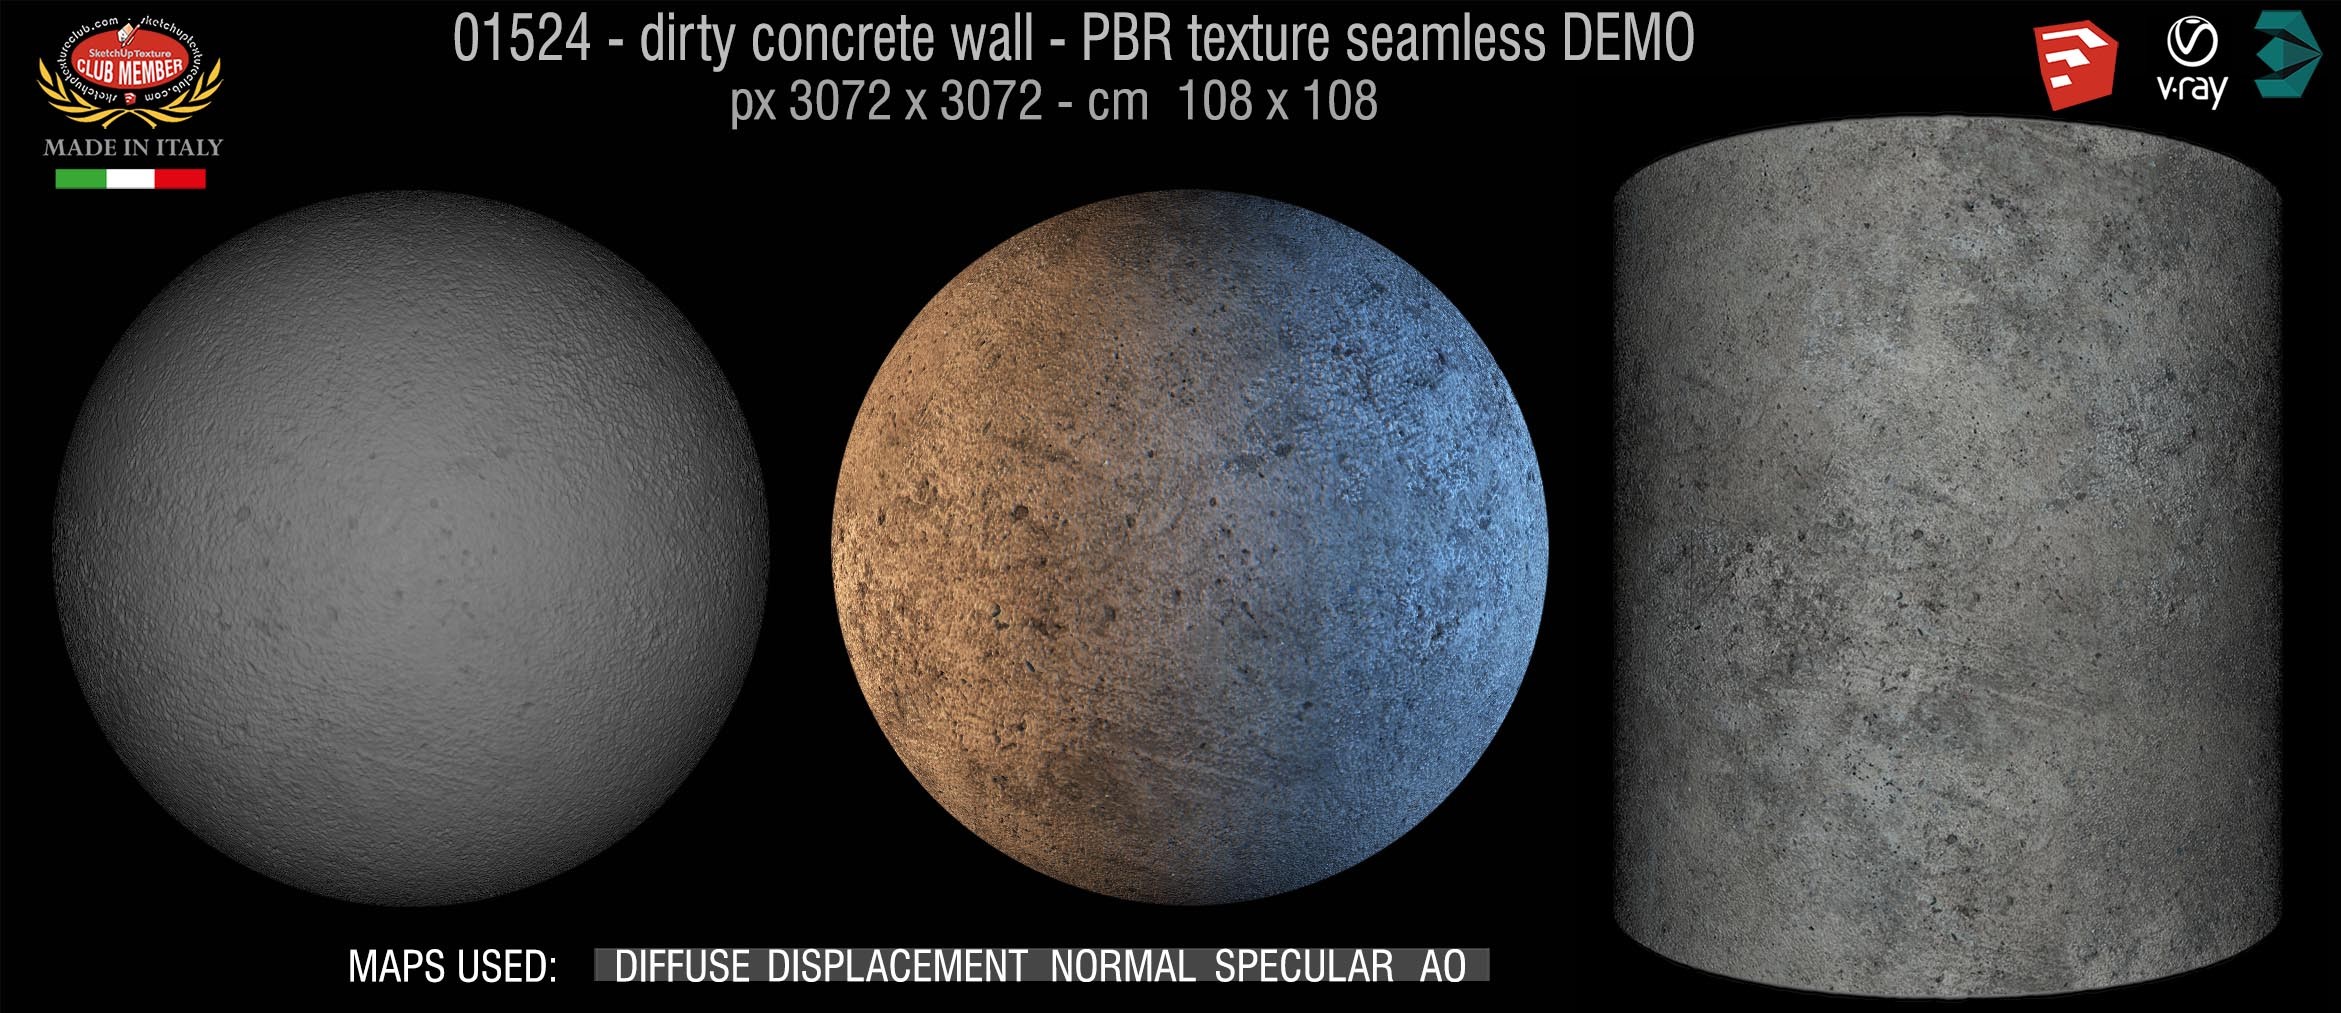 01524 Concrete bare dirty wall PBR texture seamless DEMO